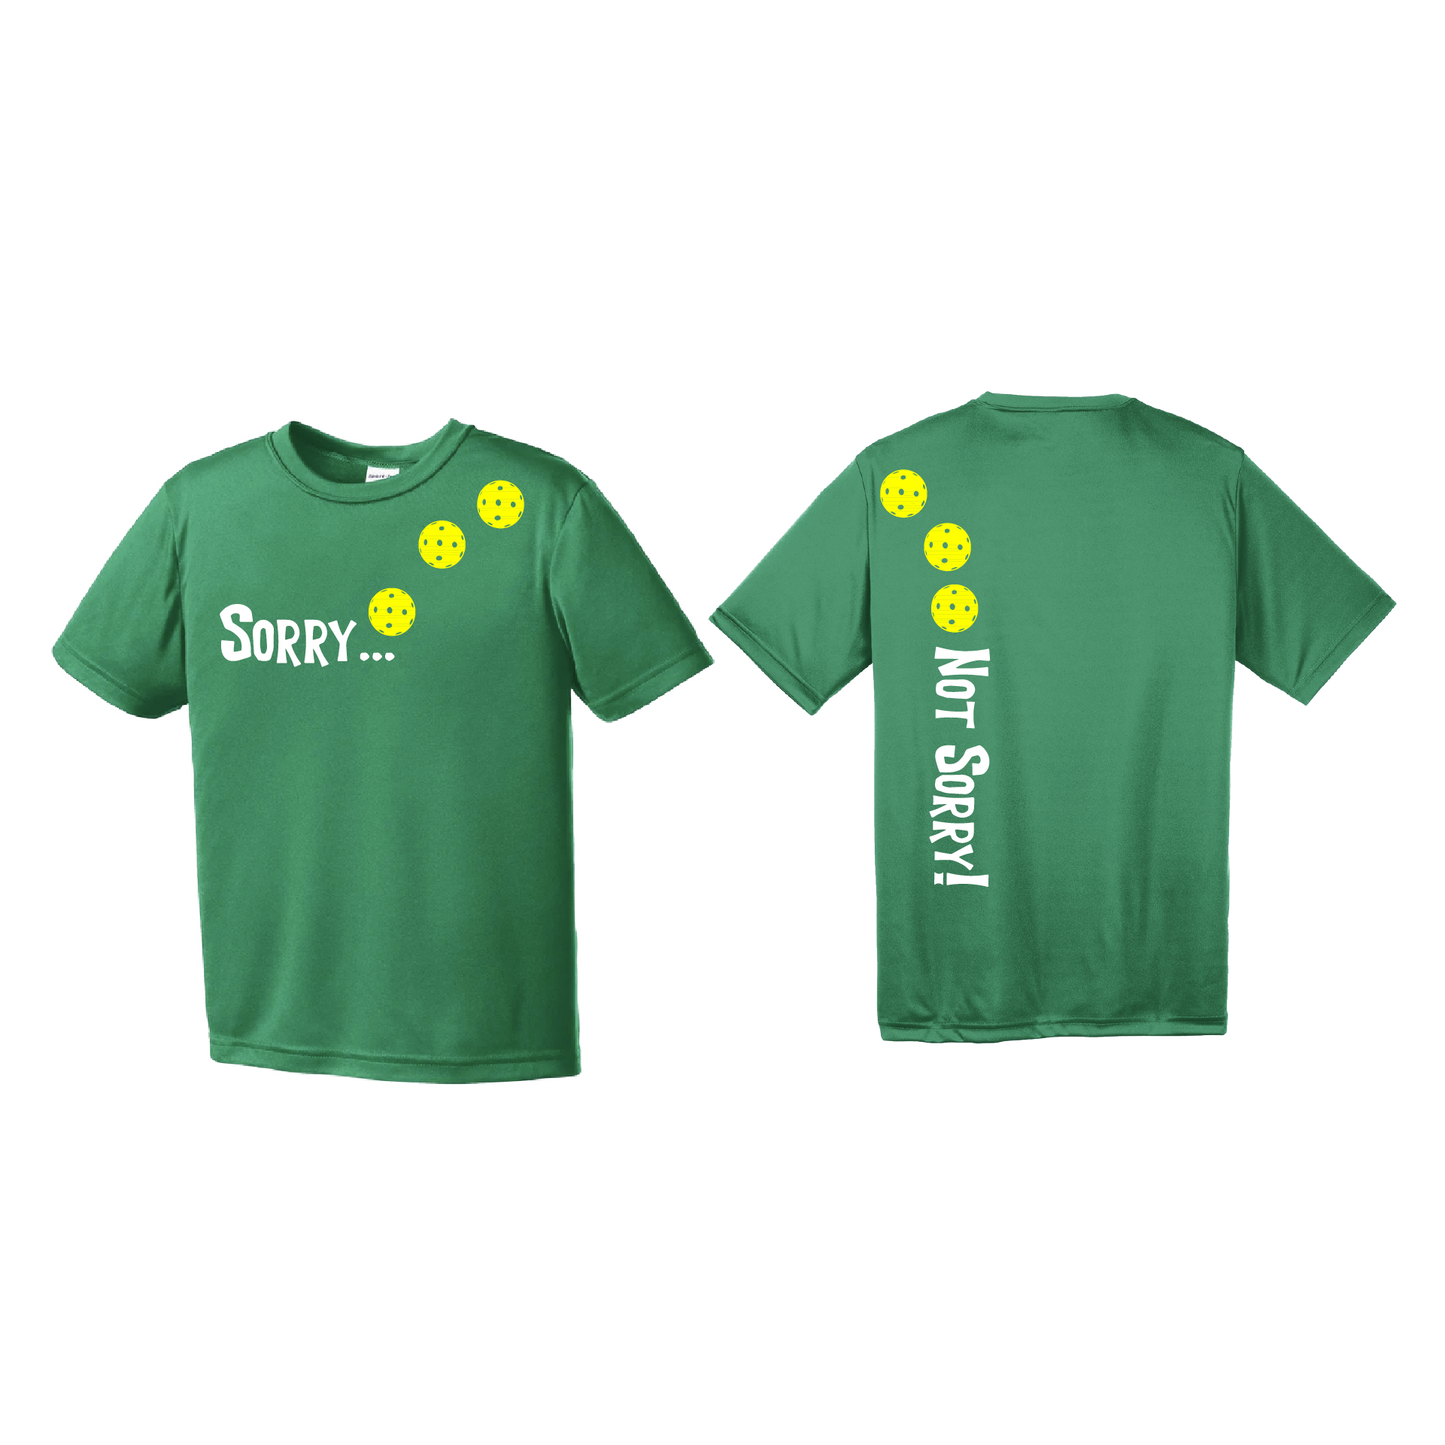 Pickleball Design: Sorry... Not Sorry - Customizable Ball Color - Choose: Yellow, White or Green.   Youth Styles: Short Sleeve  Shirts are lightweight, roomy and highly breathable. These moisture-wicking shirts are designed for athletic performance. They feature PosiCharge technology to lock in color and prevent logos from fading. Removable tag and set-in sleeves for comfort.